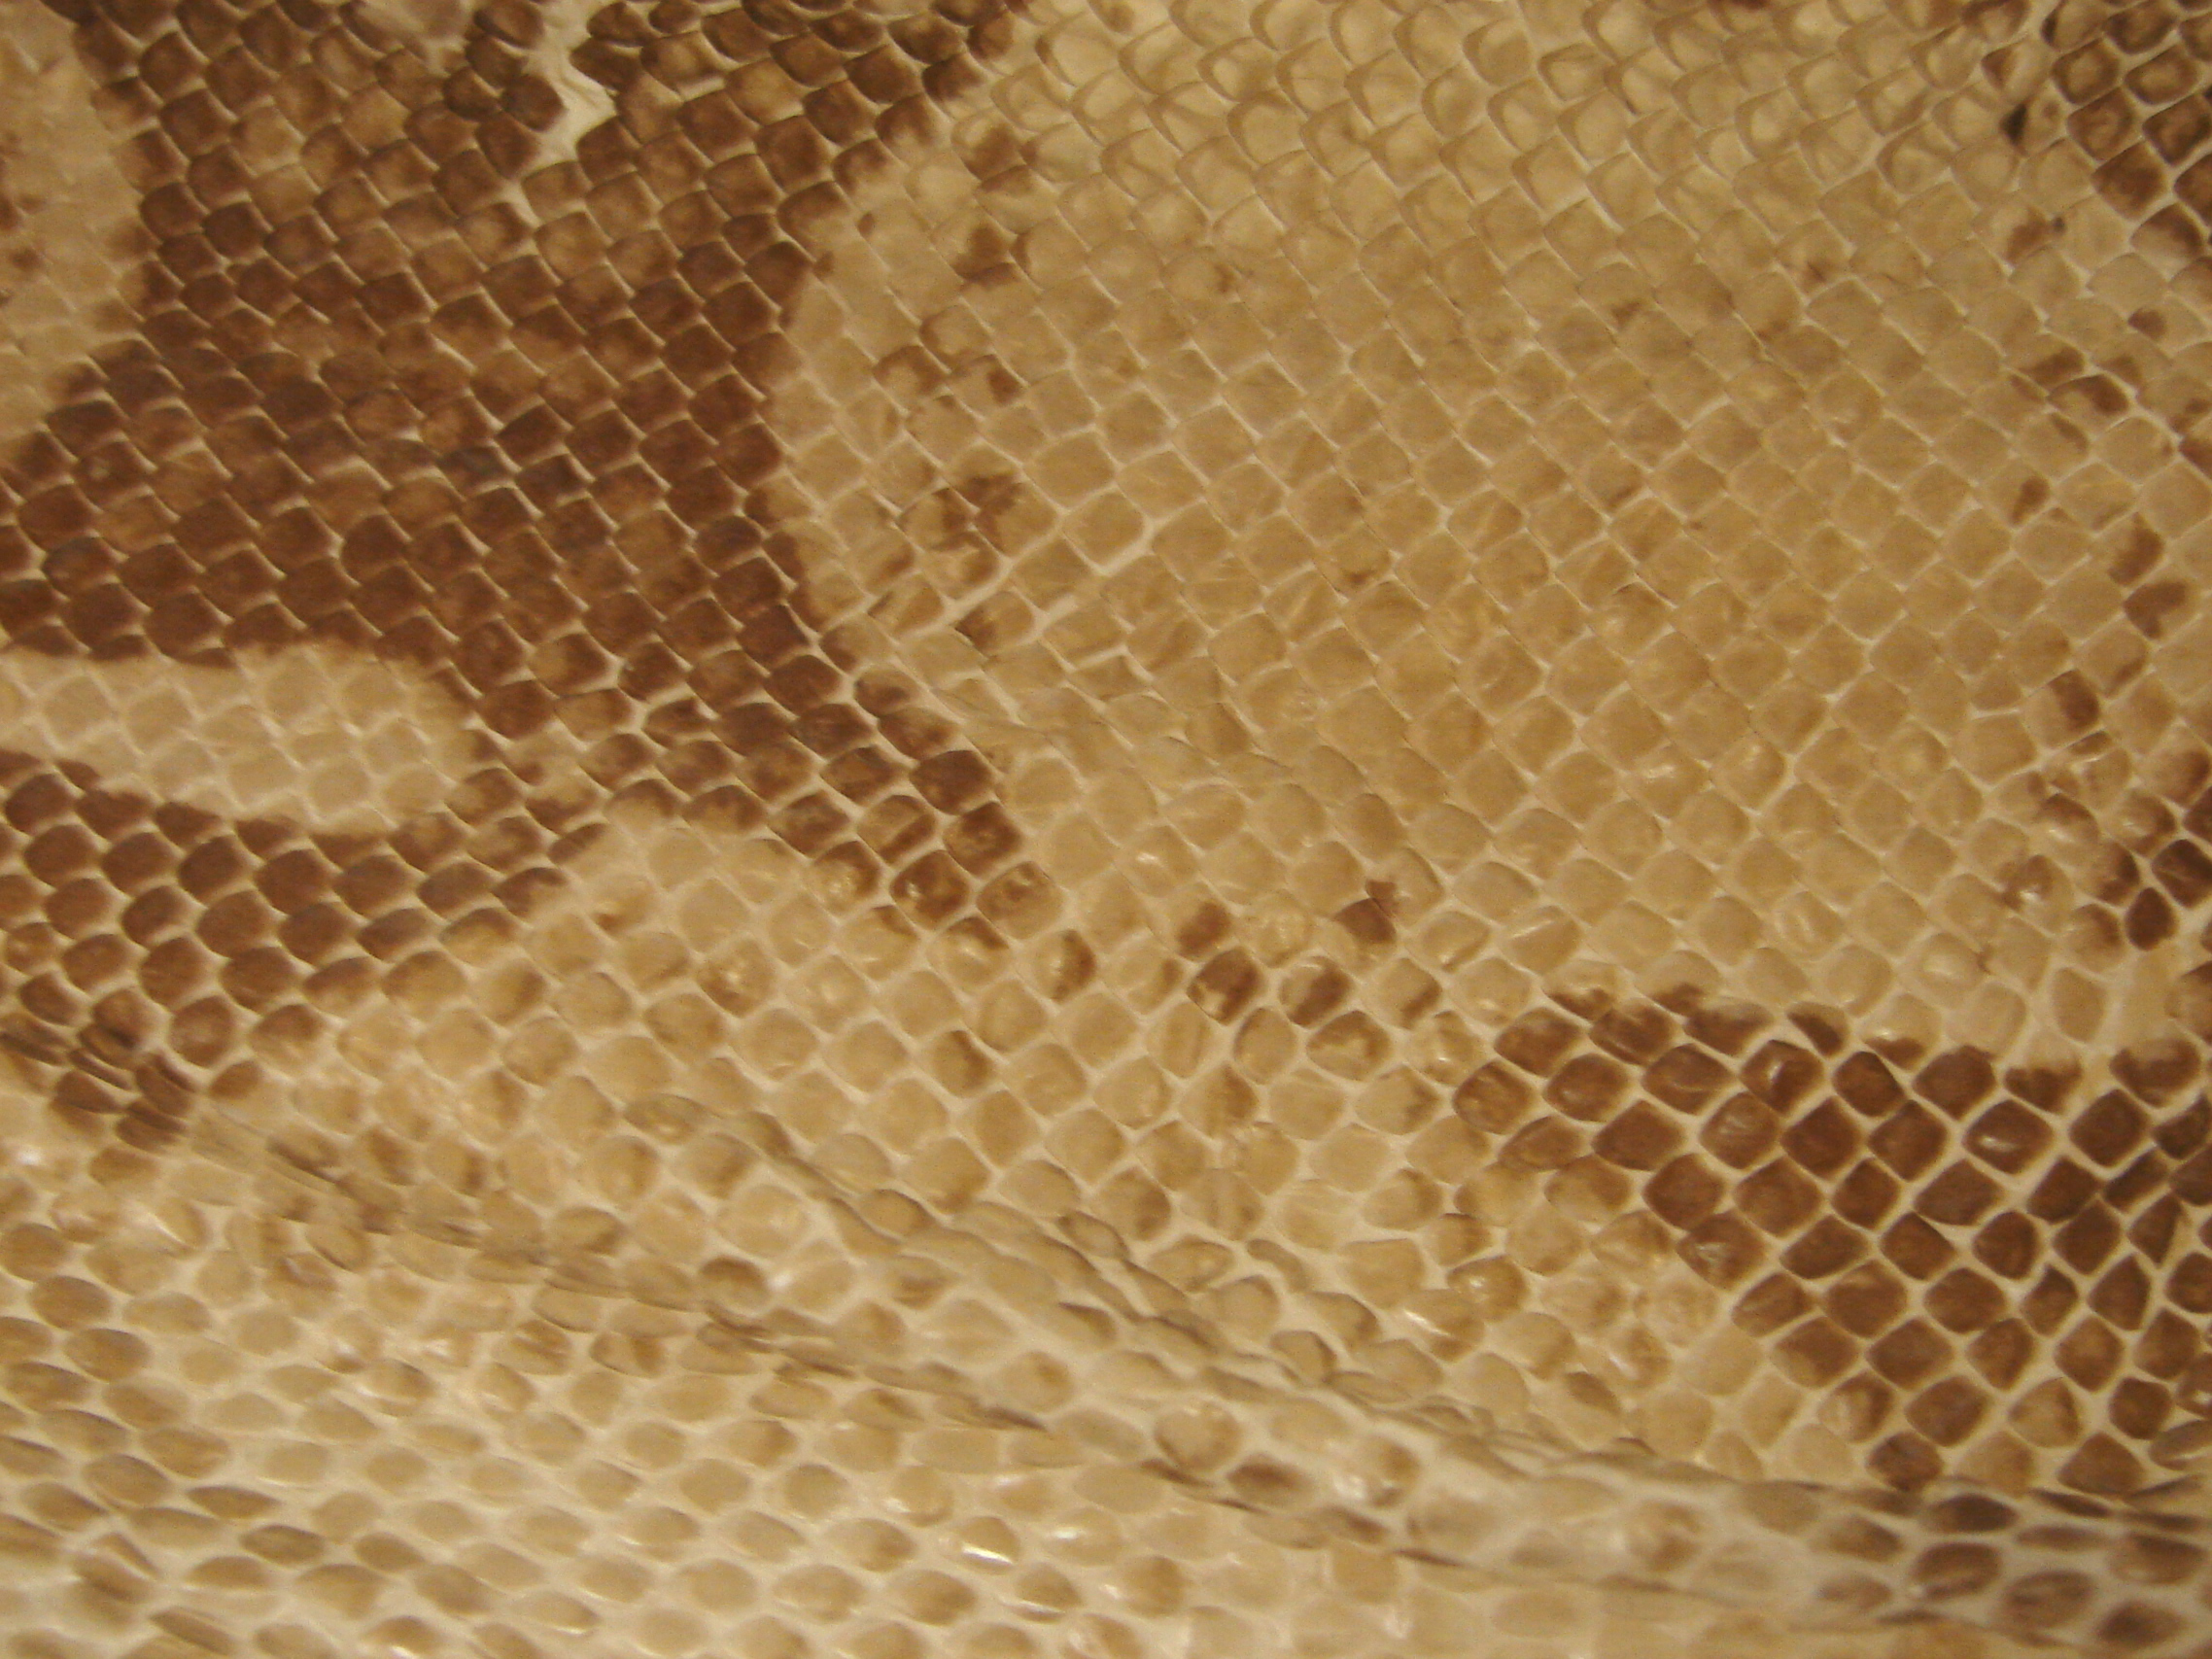 snake leather texture, background, leather background, leather background